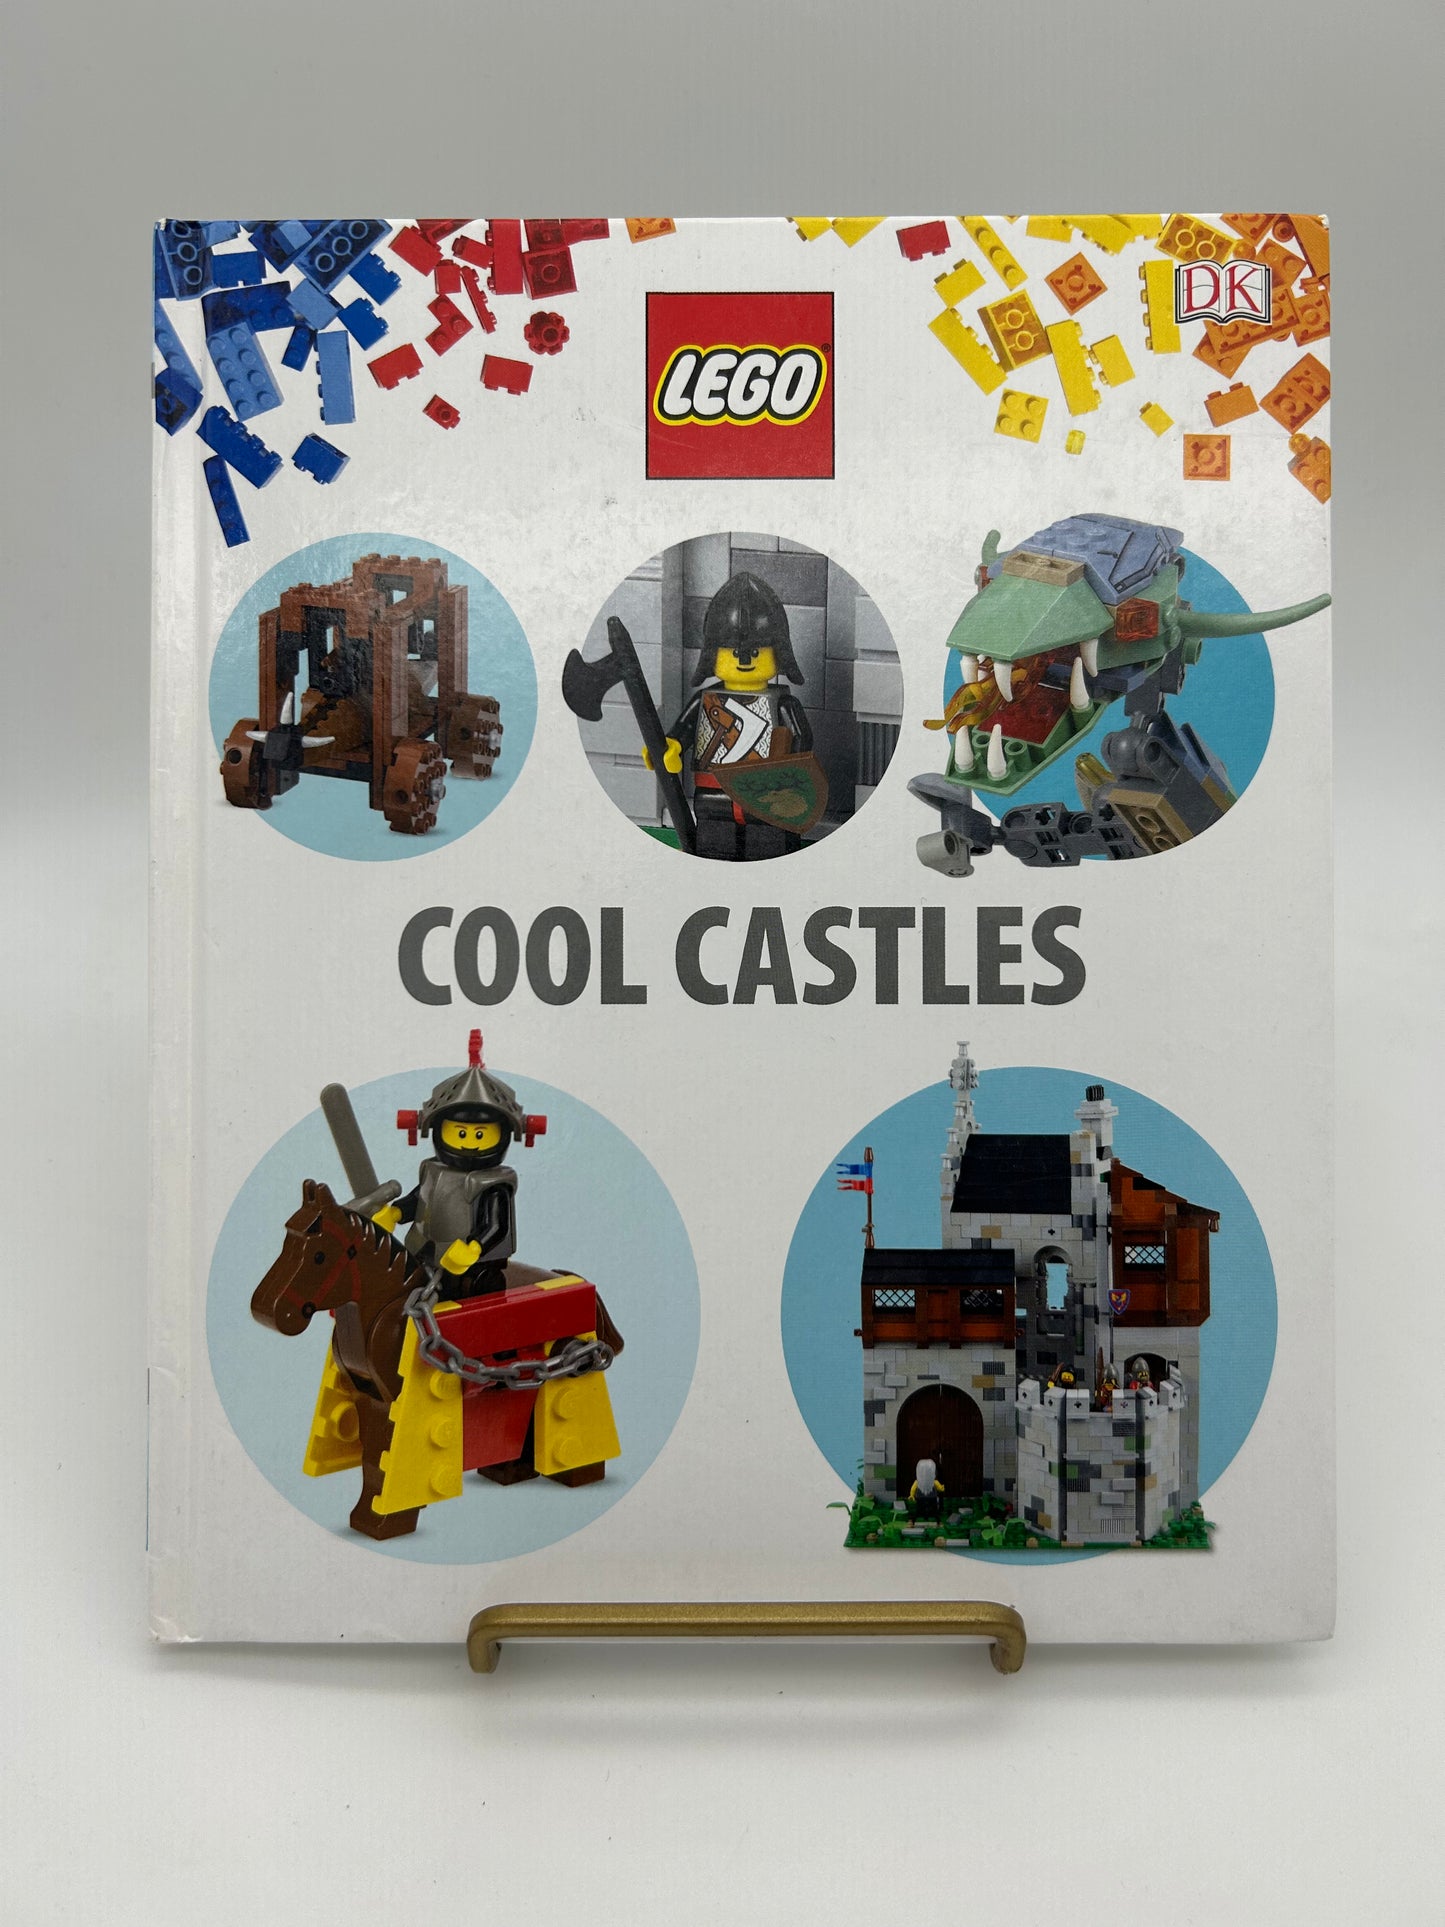 LEGO Cool Castles Hardcover Book